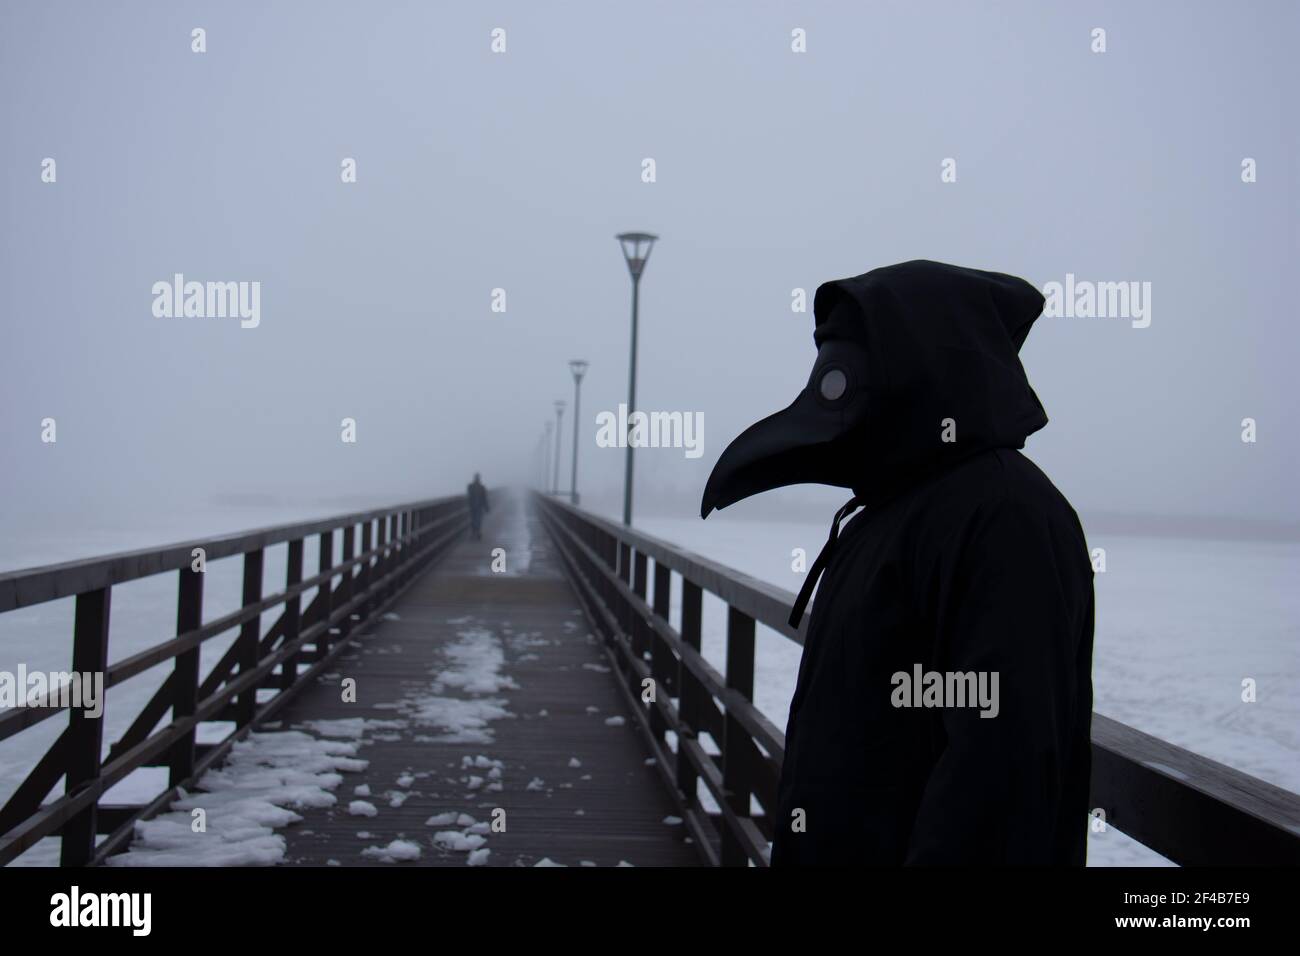 Medieval plague doctor stands on winter wooden bridge, pandemic symbol Stock Photo